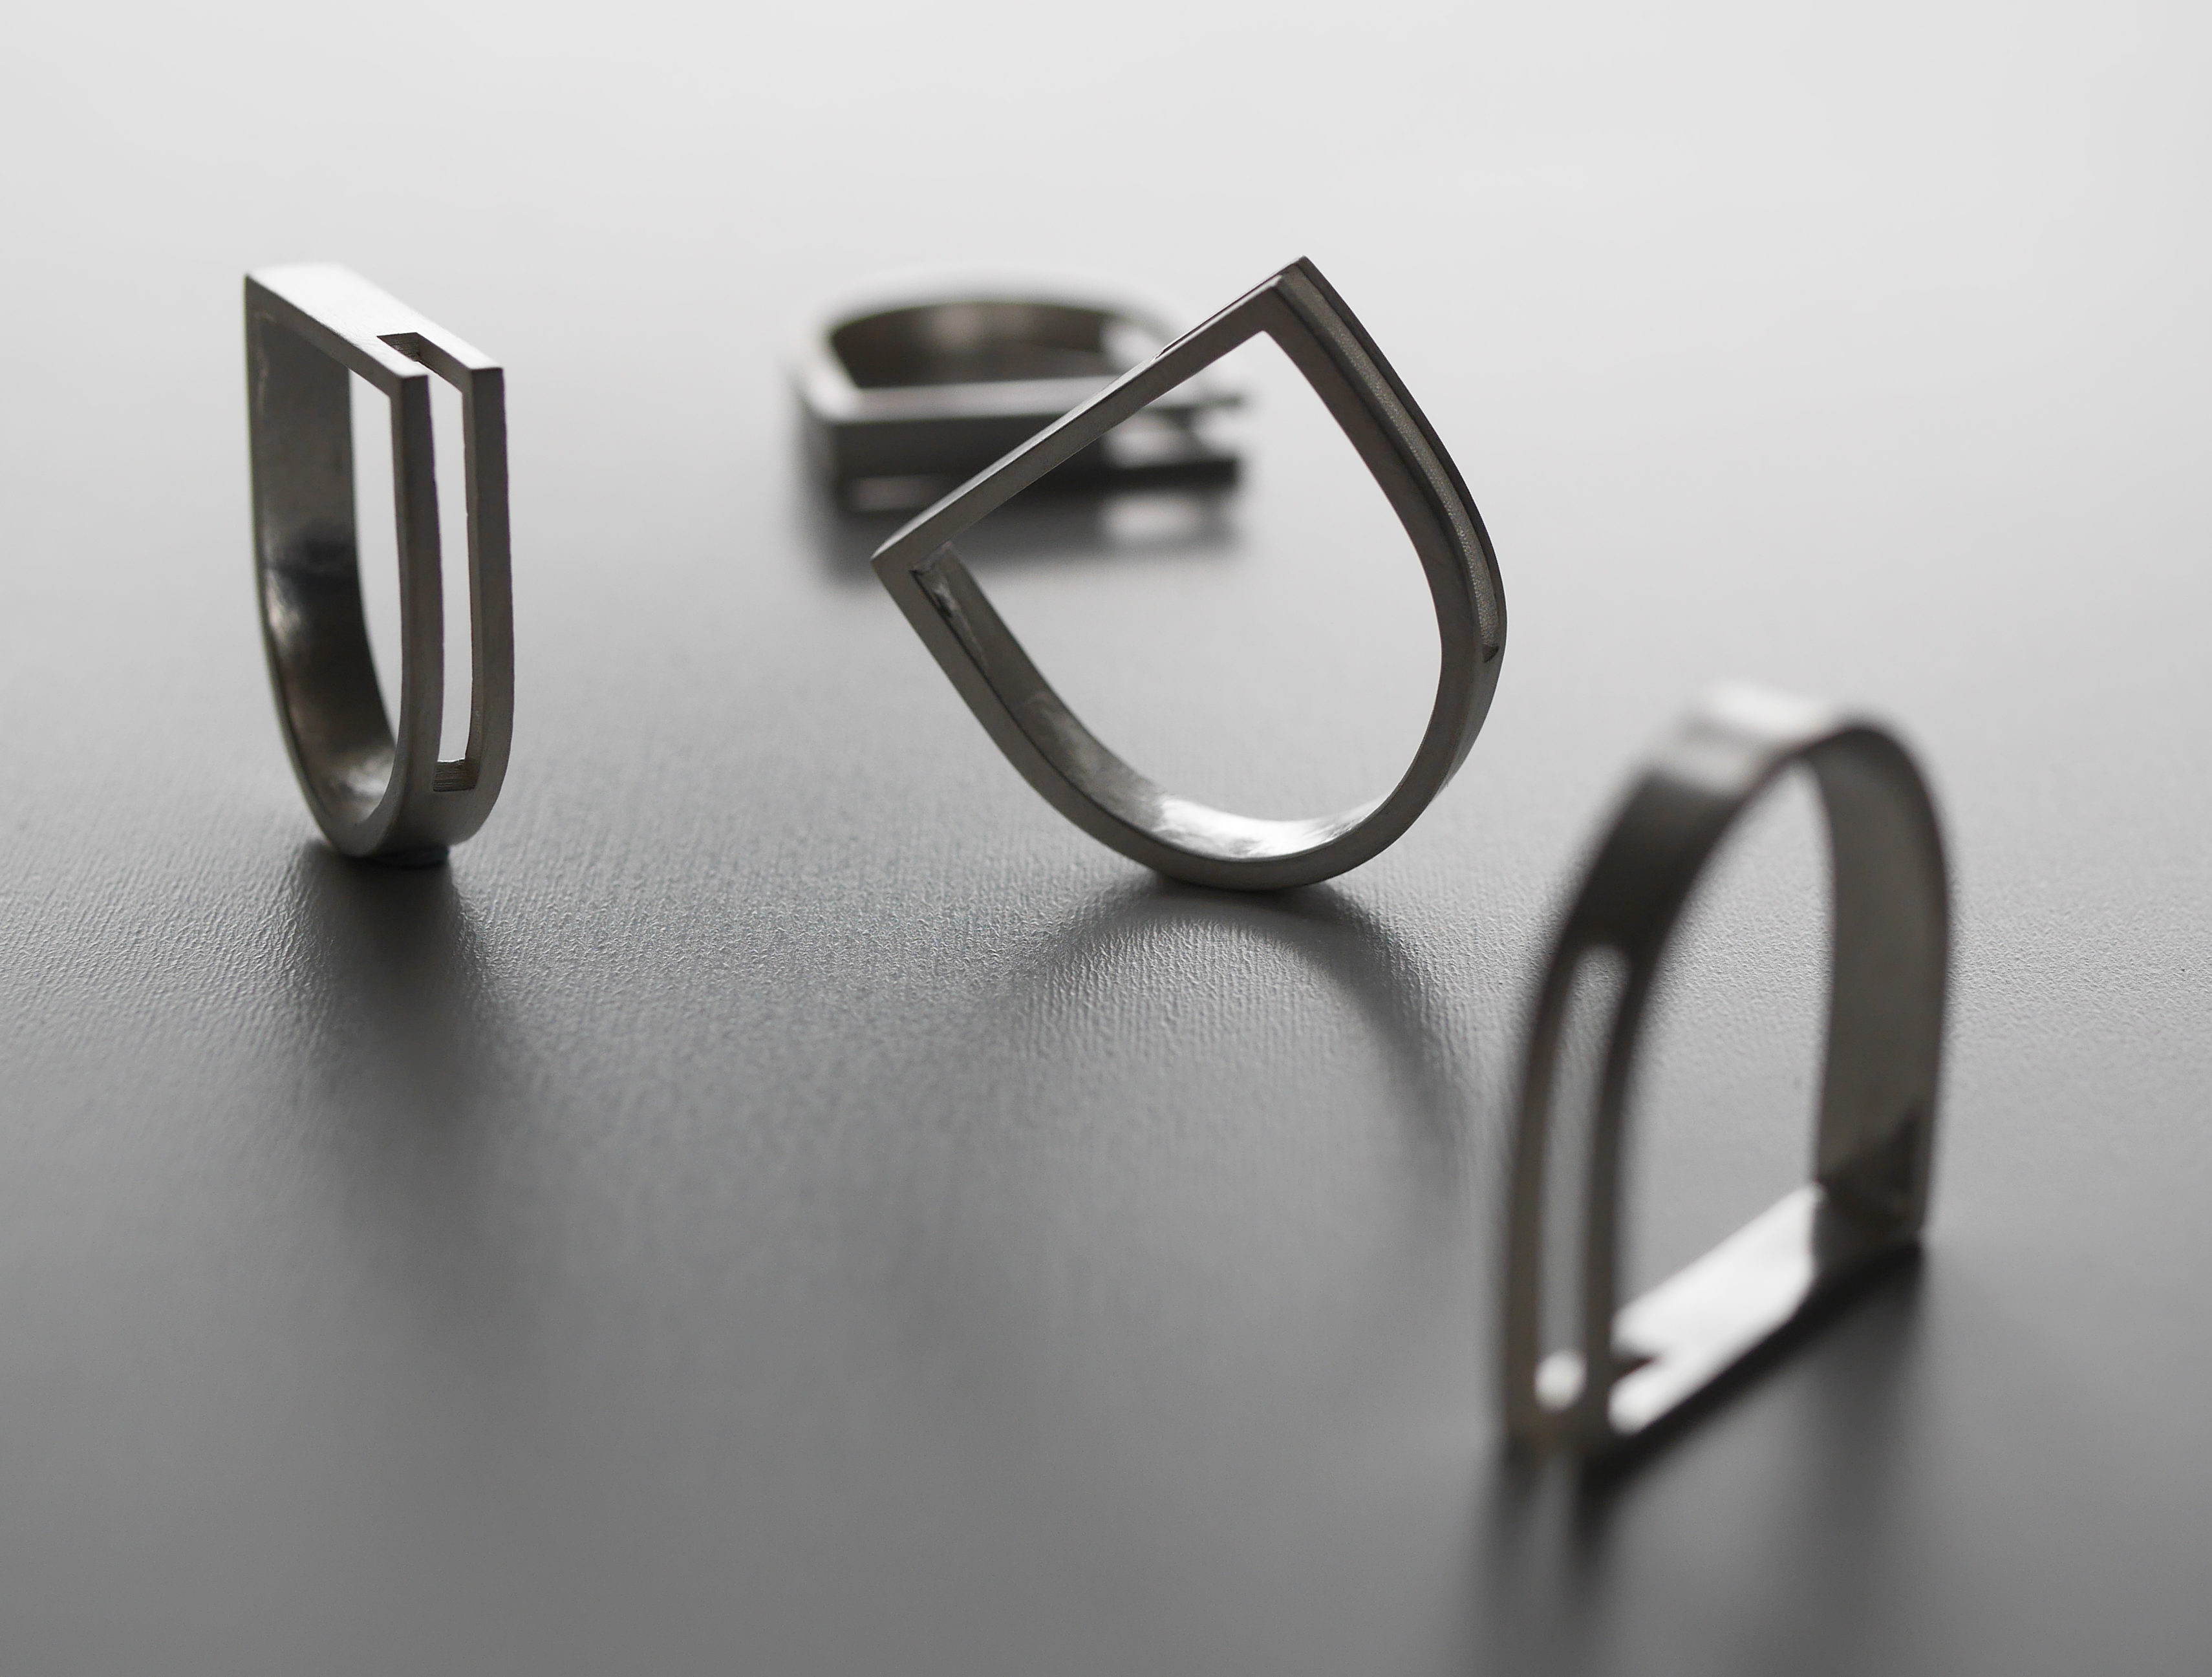 C02_D-shaped rings created by Kate McLaughlin.